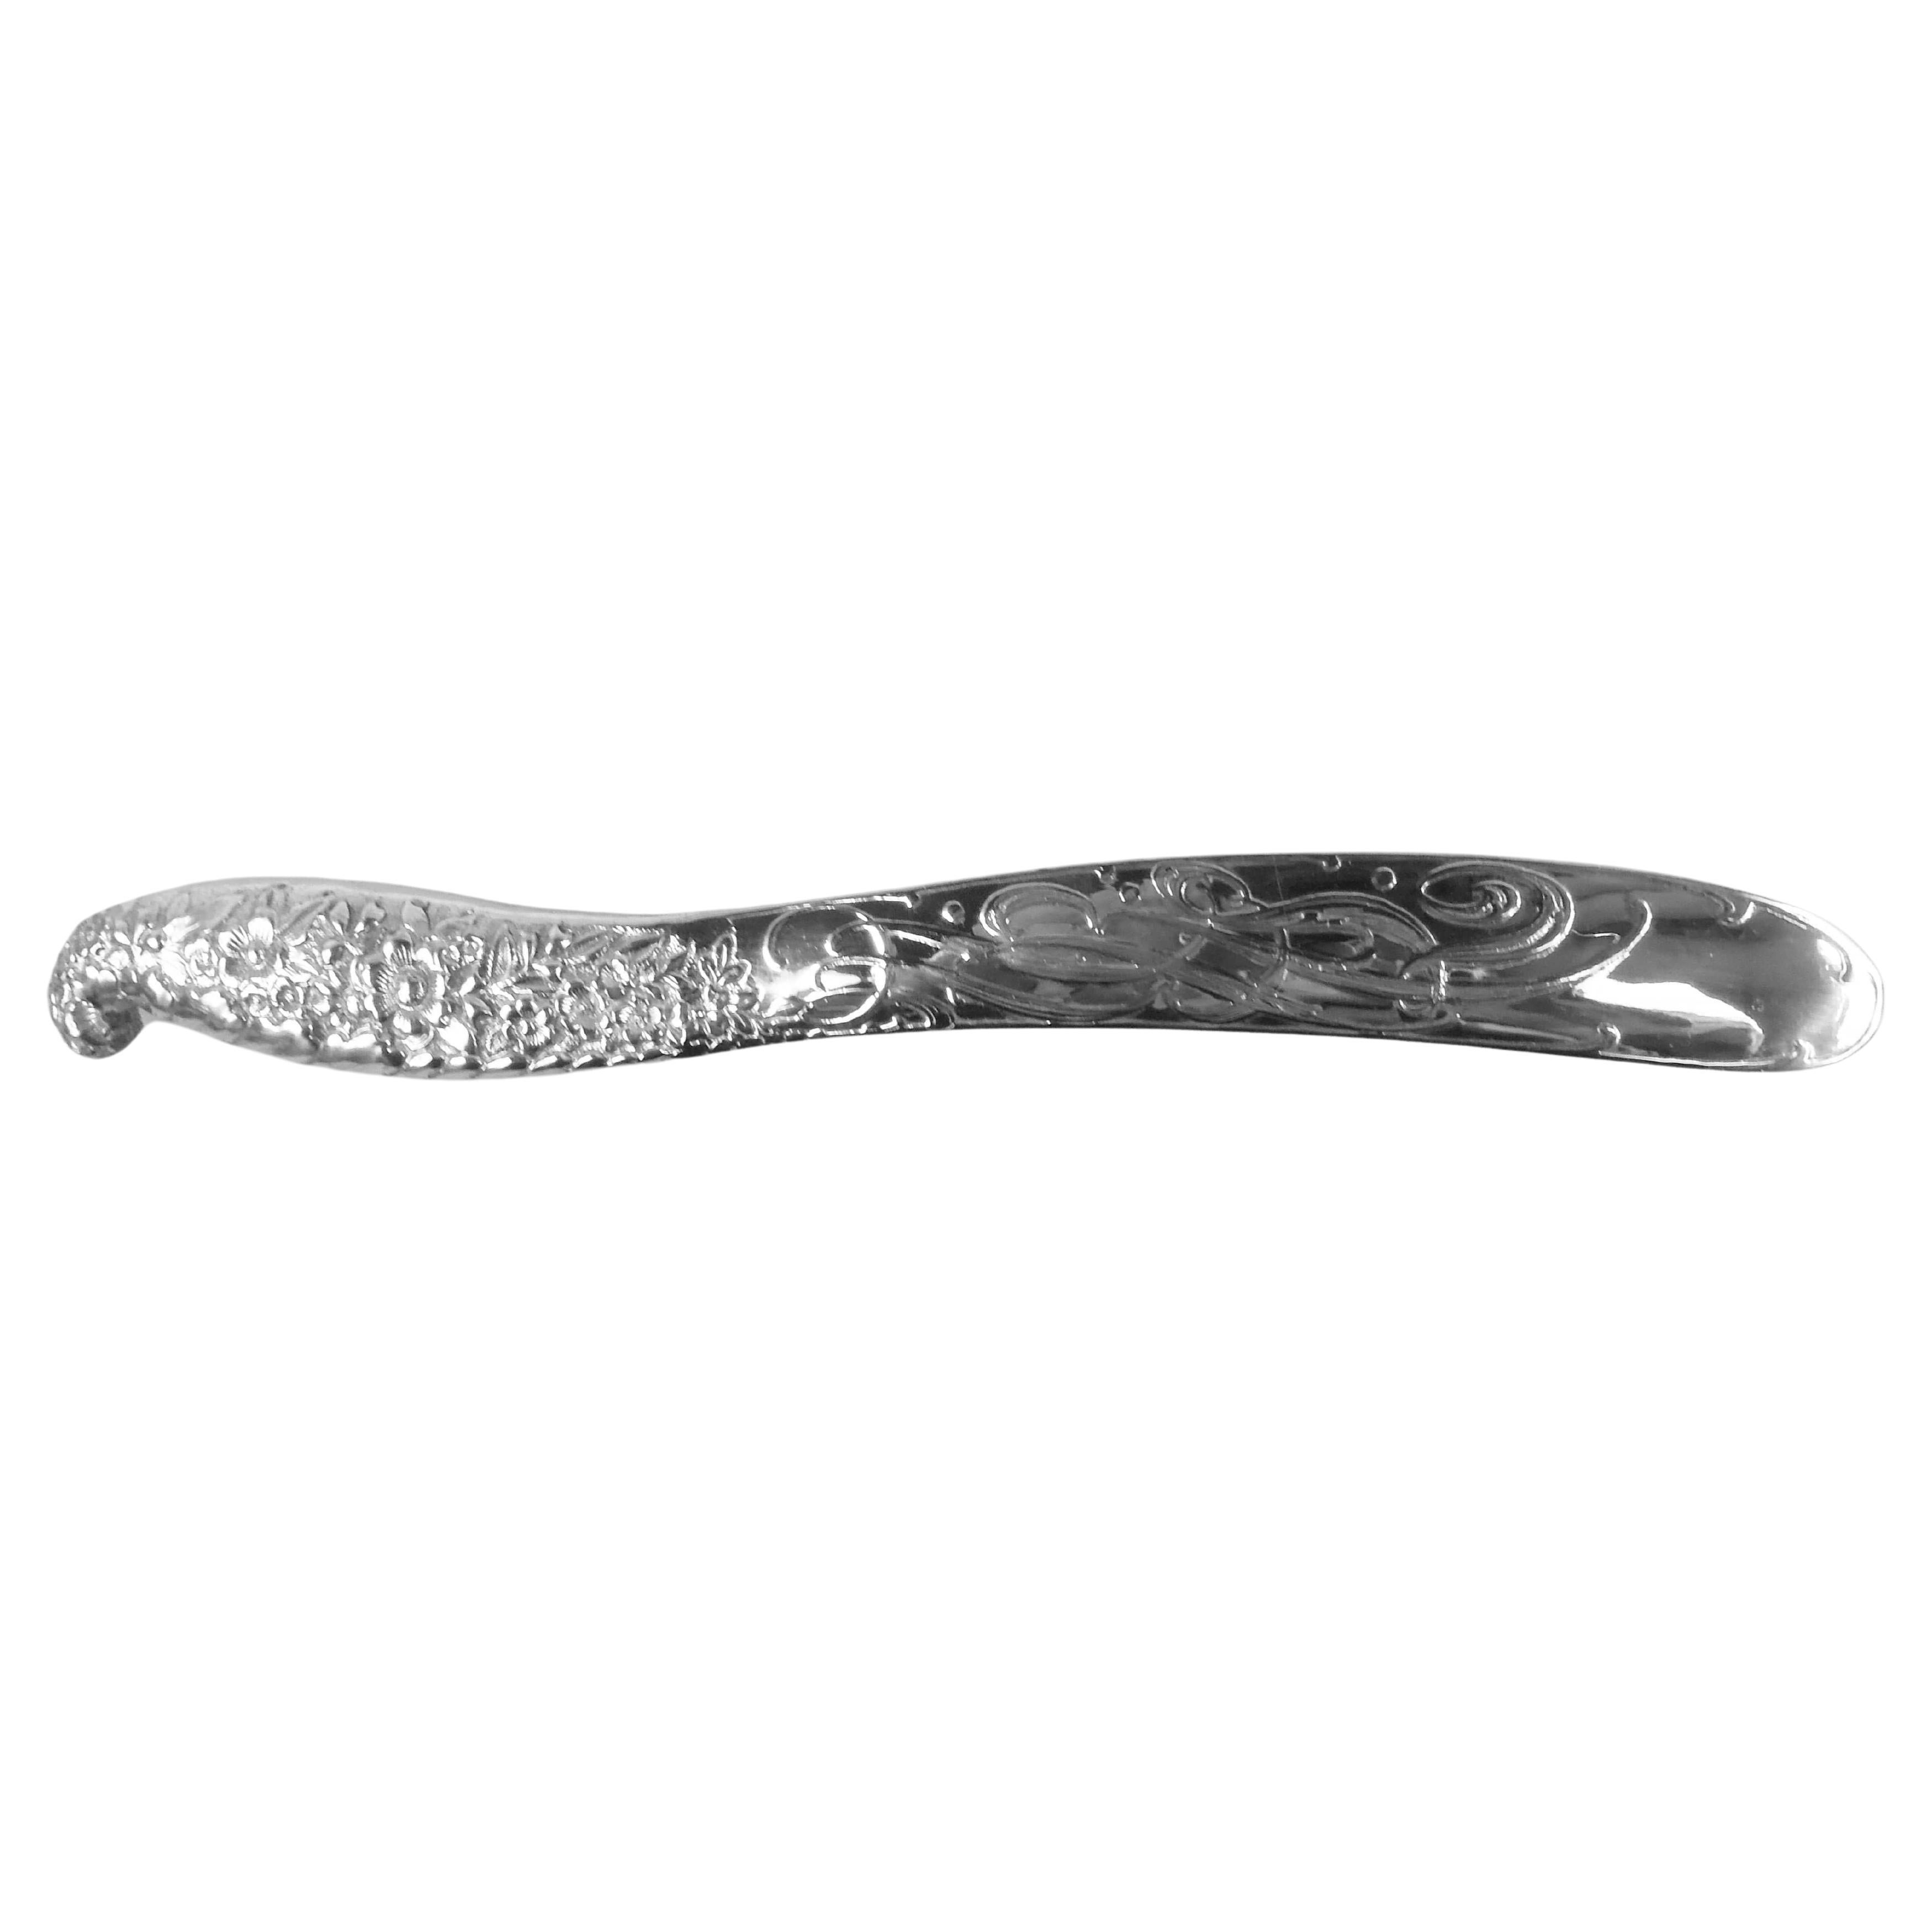 Tiffany American Victorian Classical Sterling Silver Paper Knife For Sale